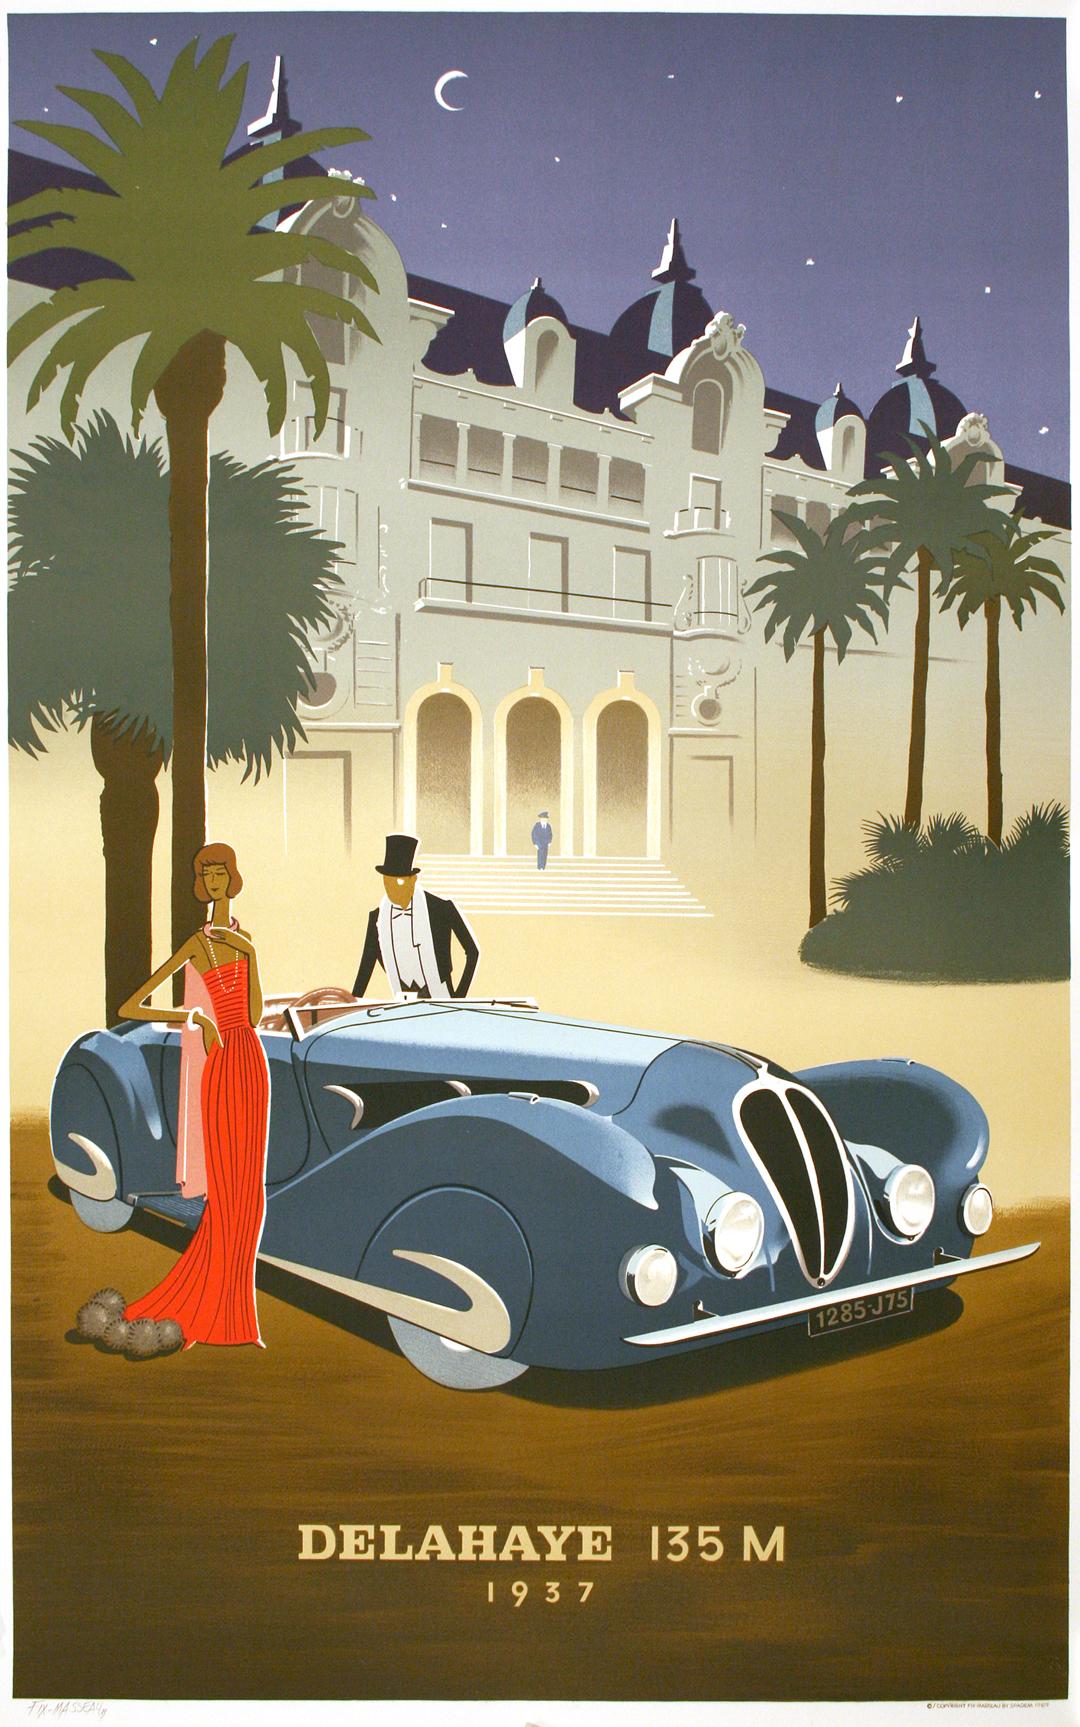 Delahaye is a 1989 poster by Pierre Fix-Masseau. The artwork features the classic 1937 Delahaye model 135 M amidst the backdrop of the famous Casino de Monte-Carlo. This poster commemorates the 1937 Monte-Carlo Rally, at which a competition version